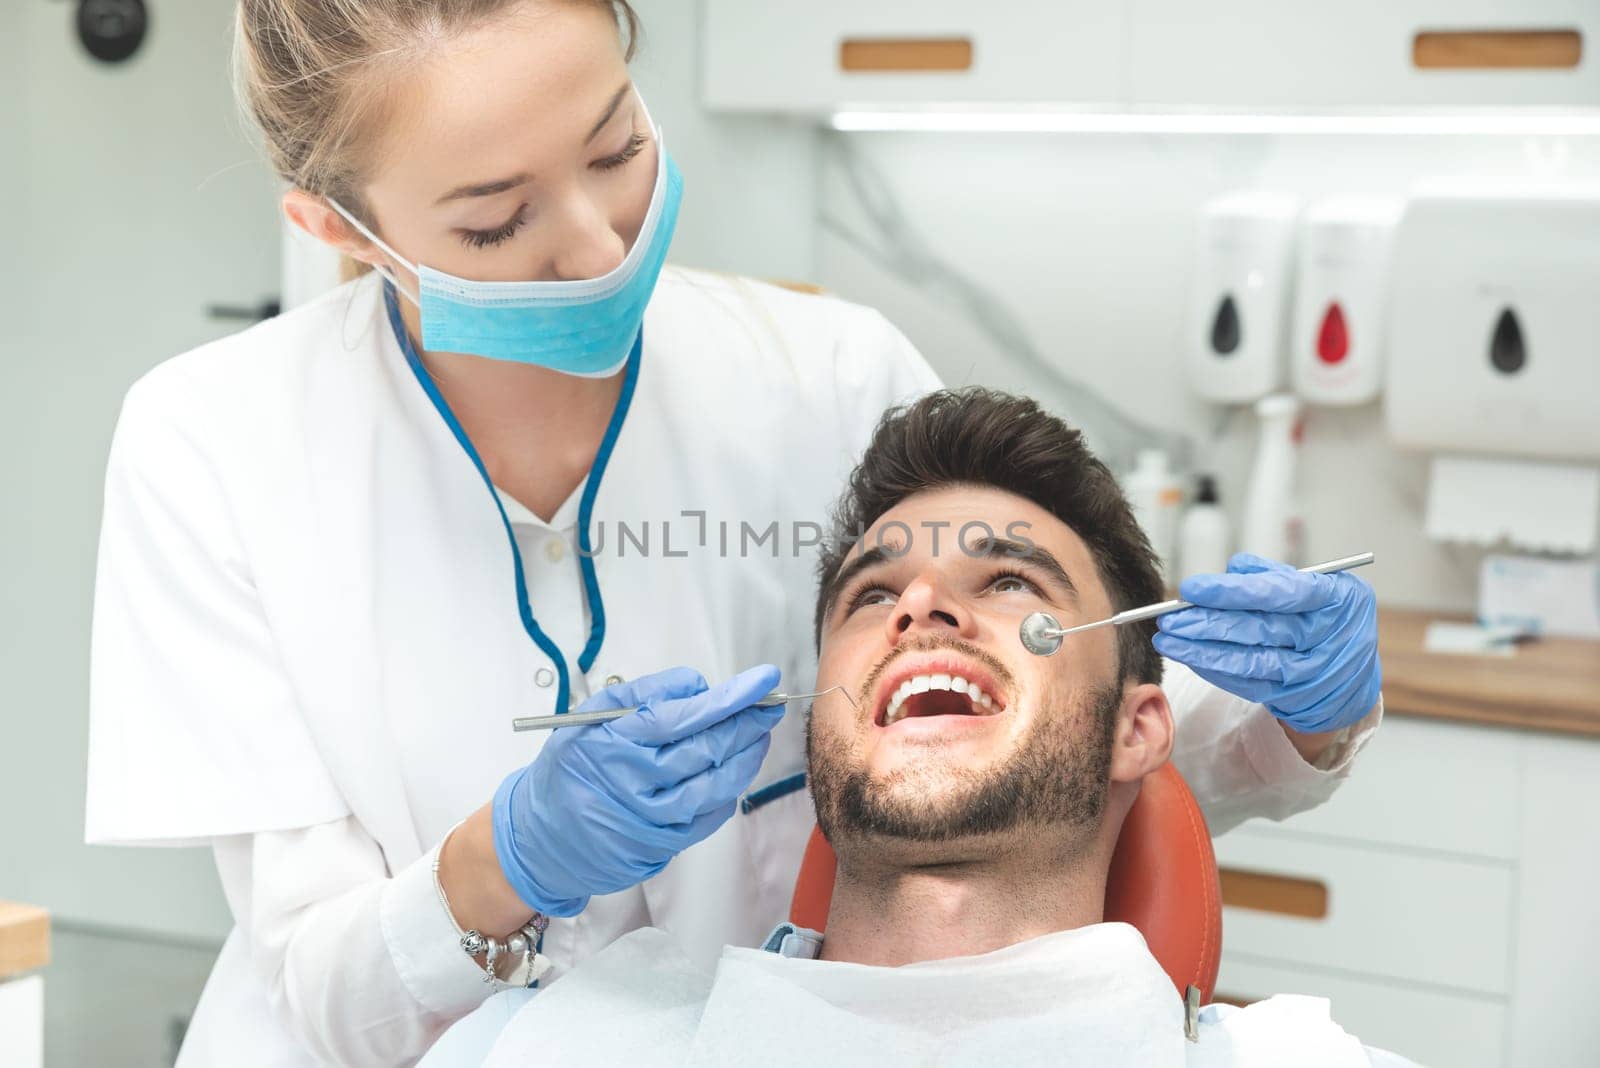 Man having teeth examined at dentists. Overview of dental caries prevention